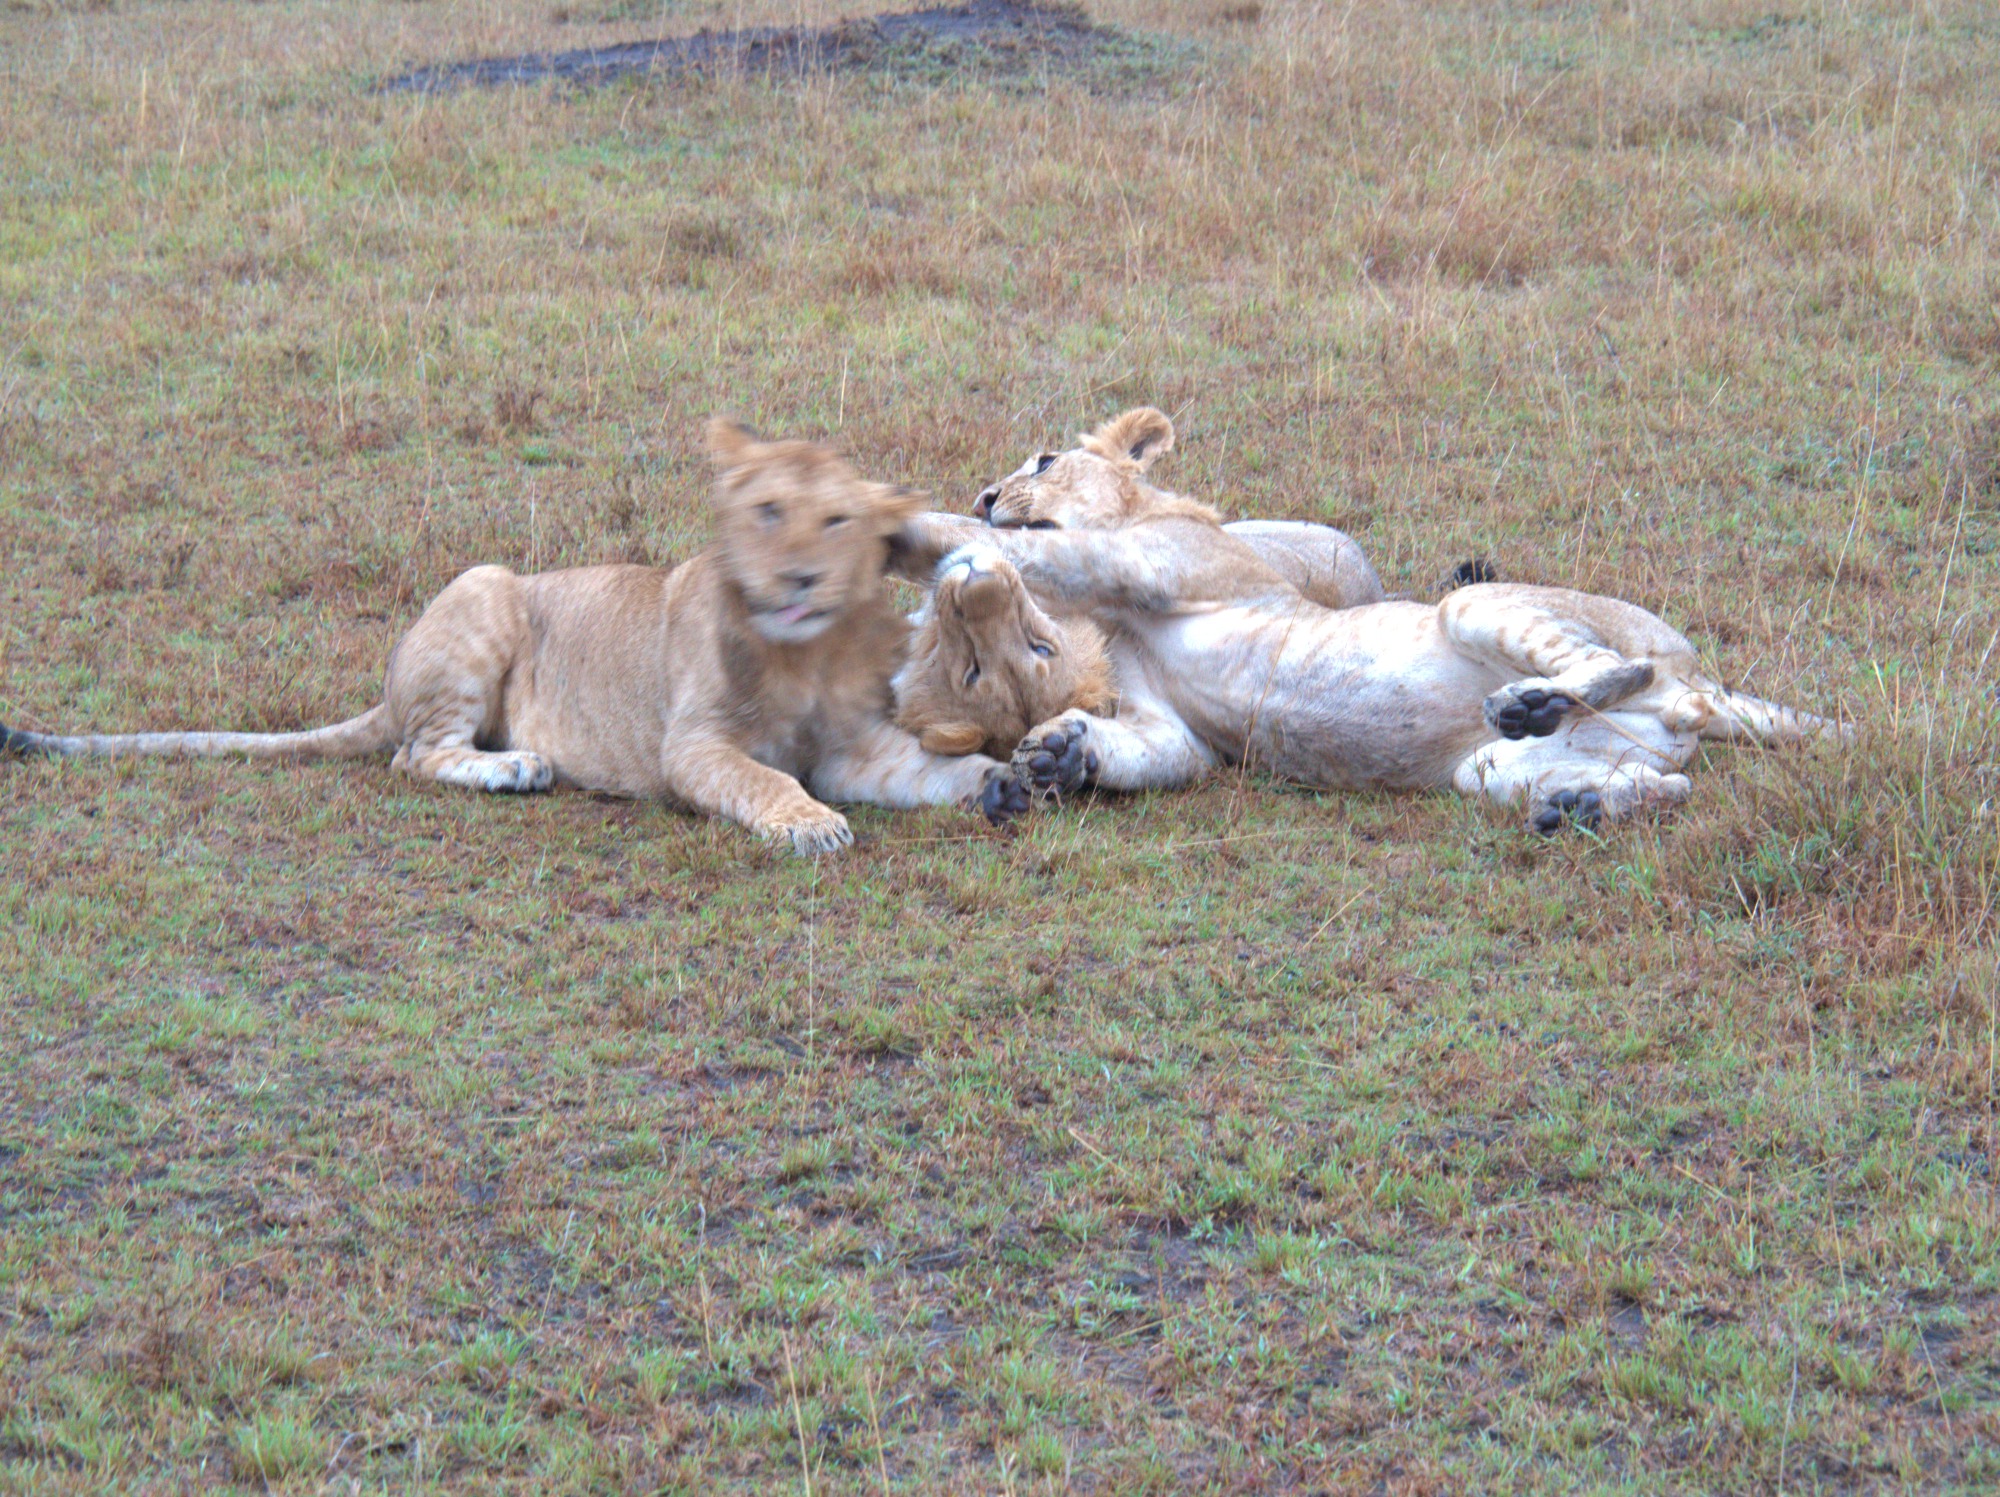 Lion practical jokes:Hit your friend in the head just as the picture is being taken